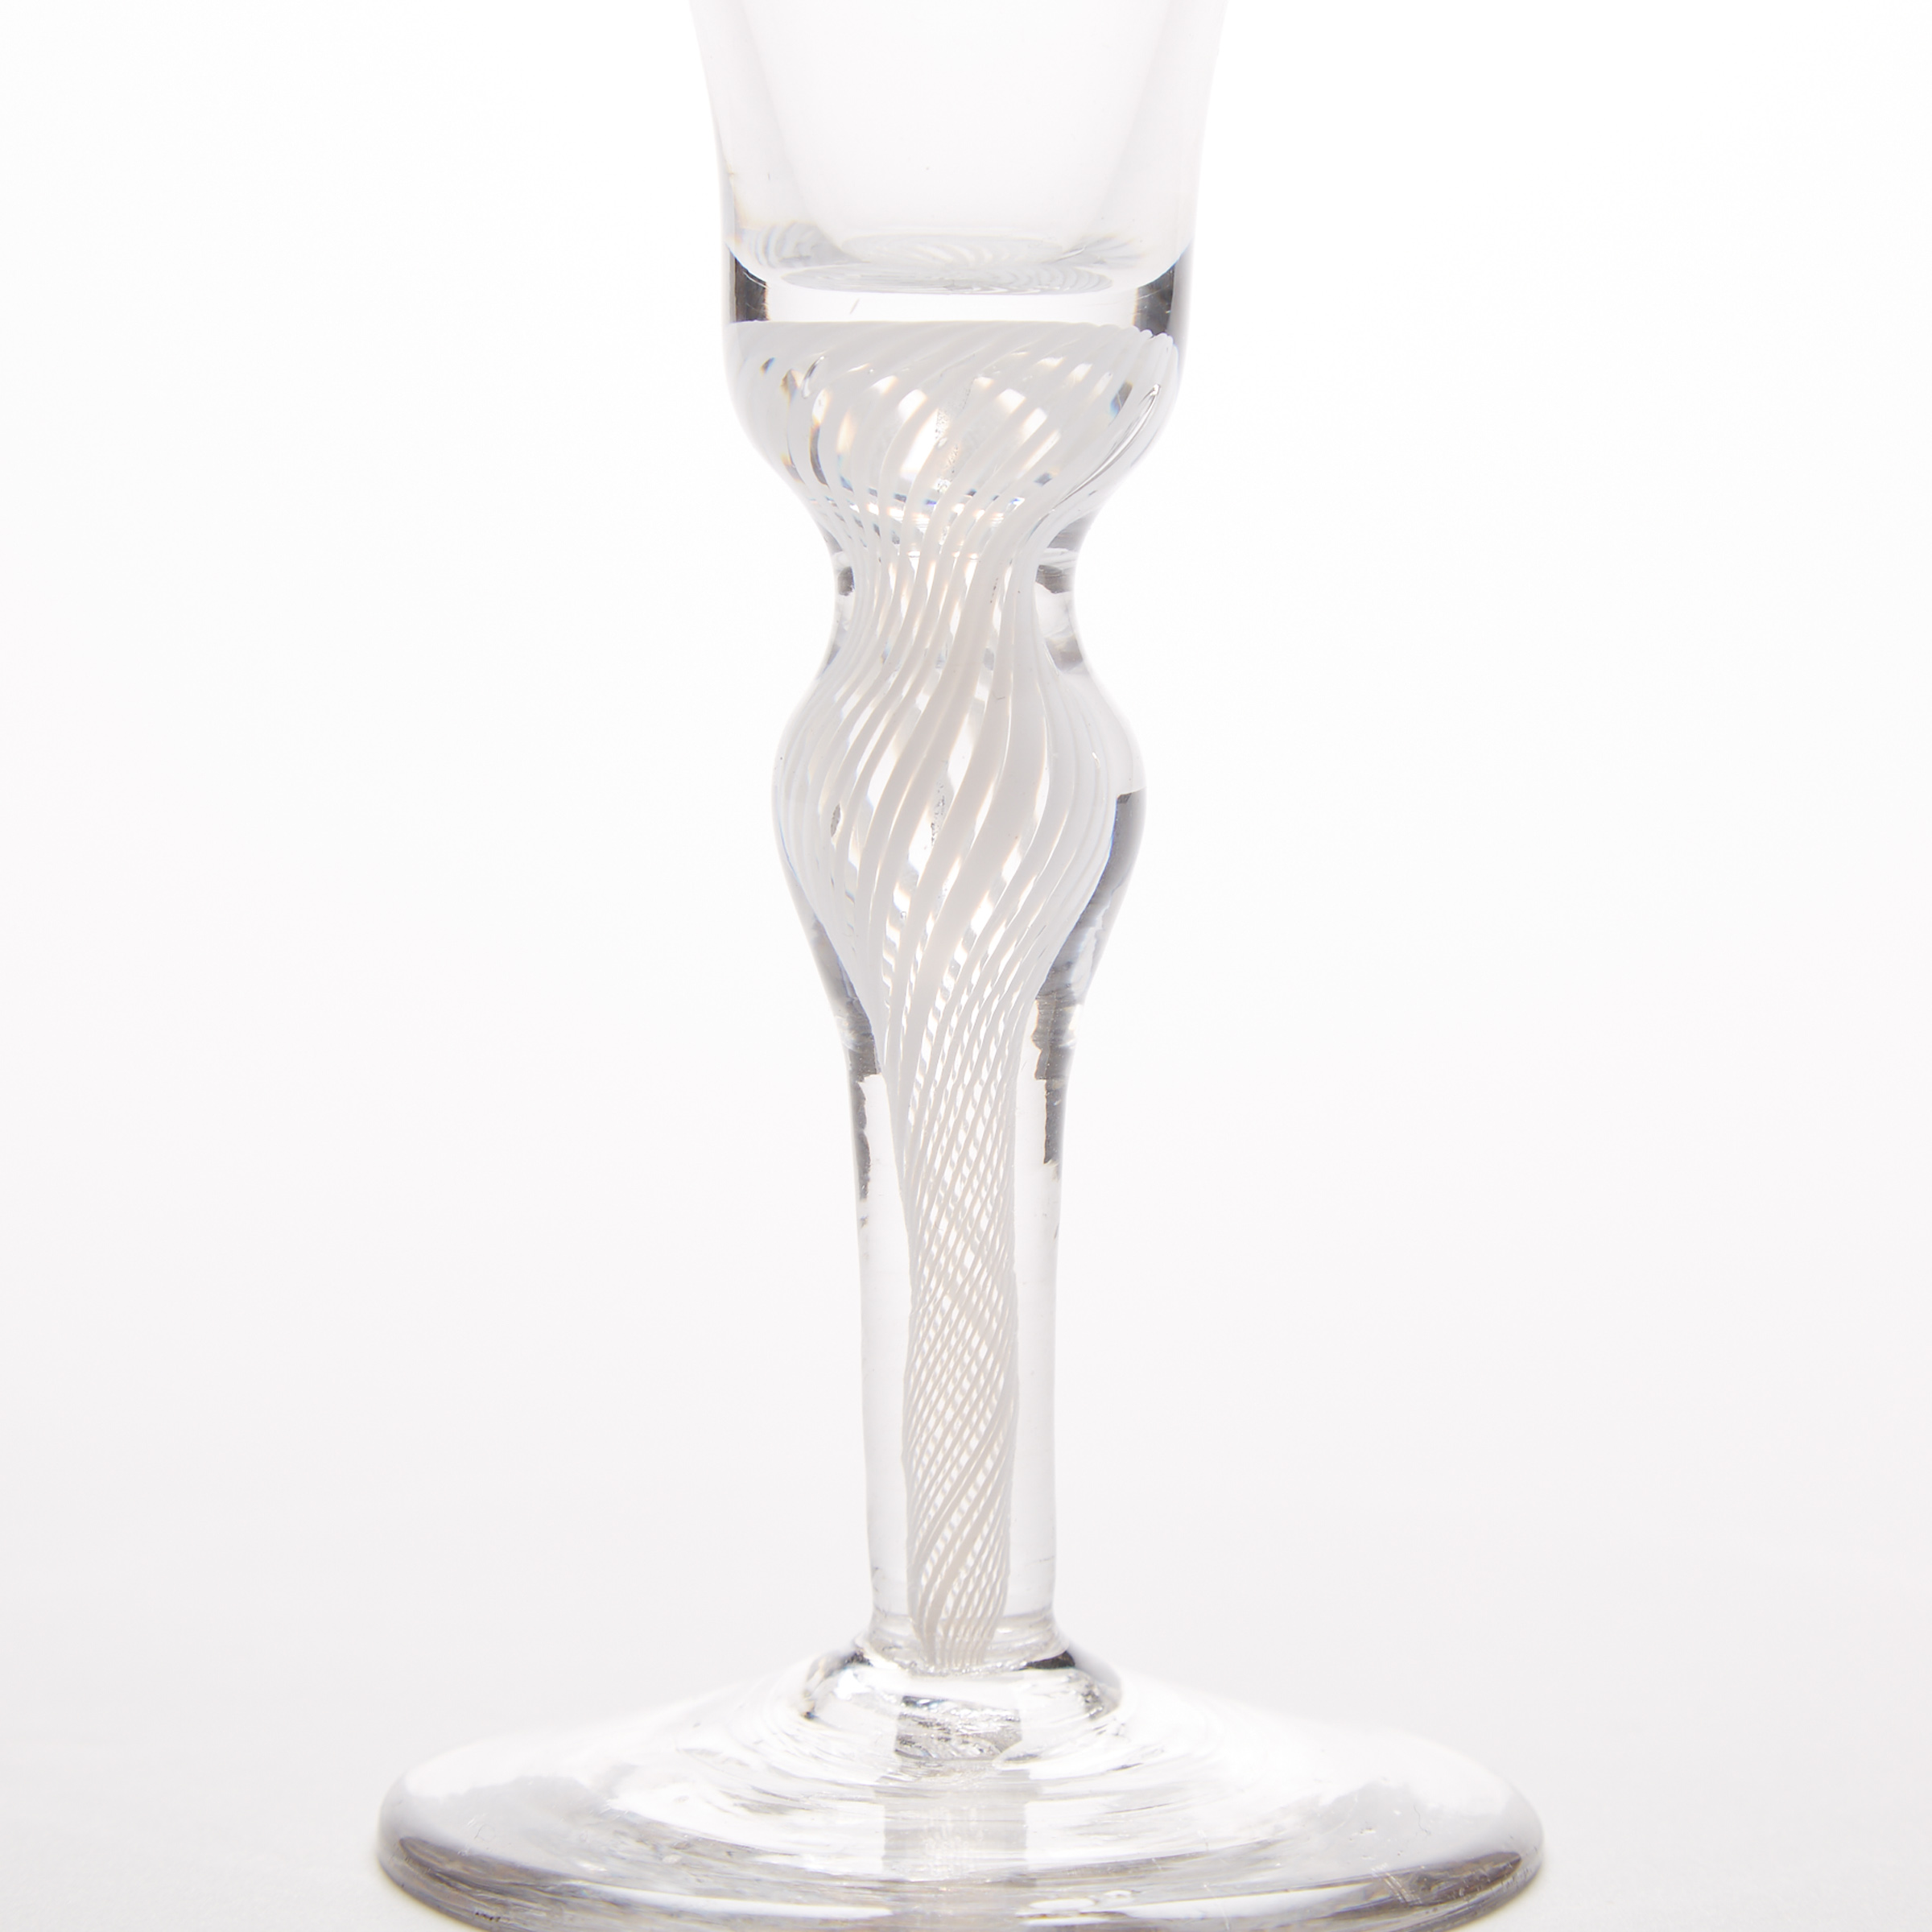 English Knopped Opaque Twist Stemmed Wine Glass, c.1760